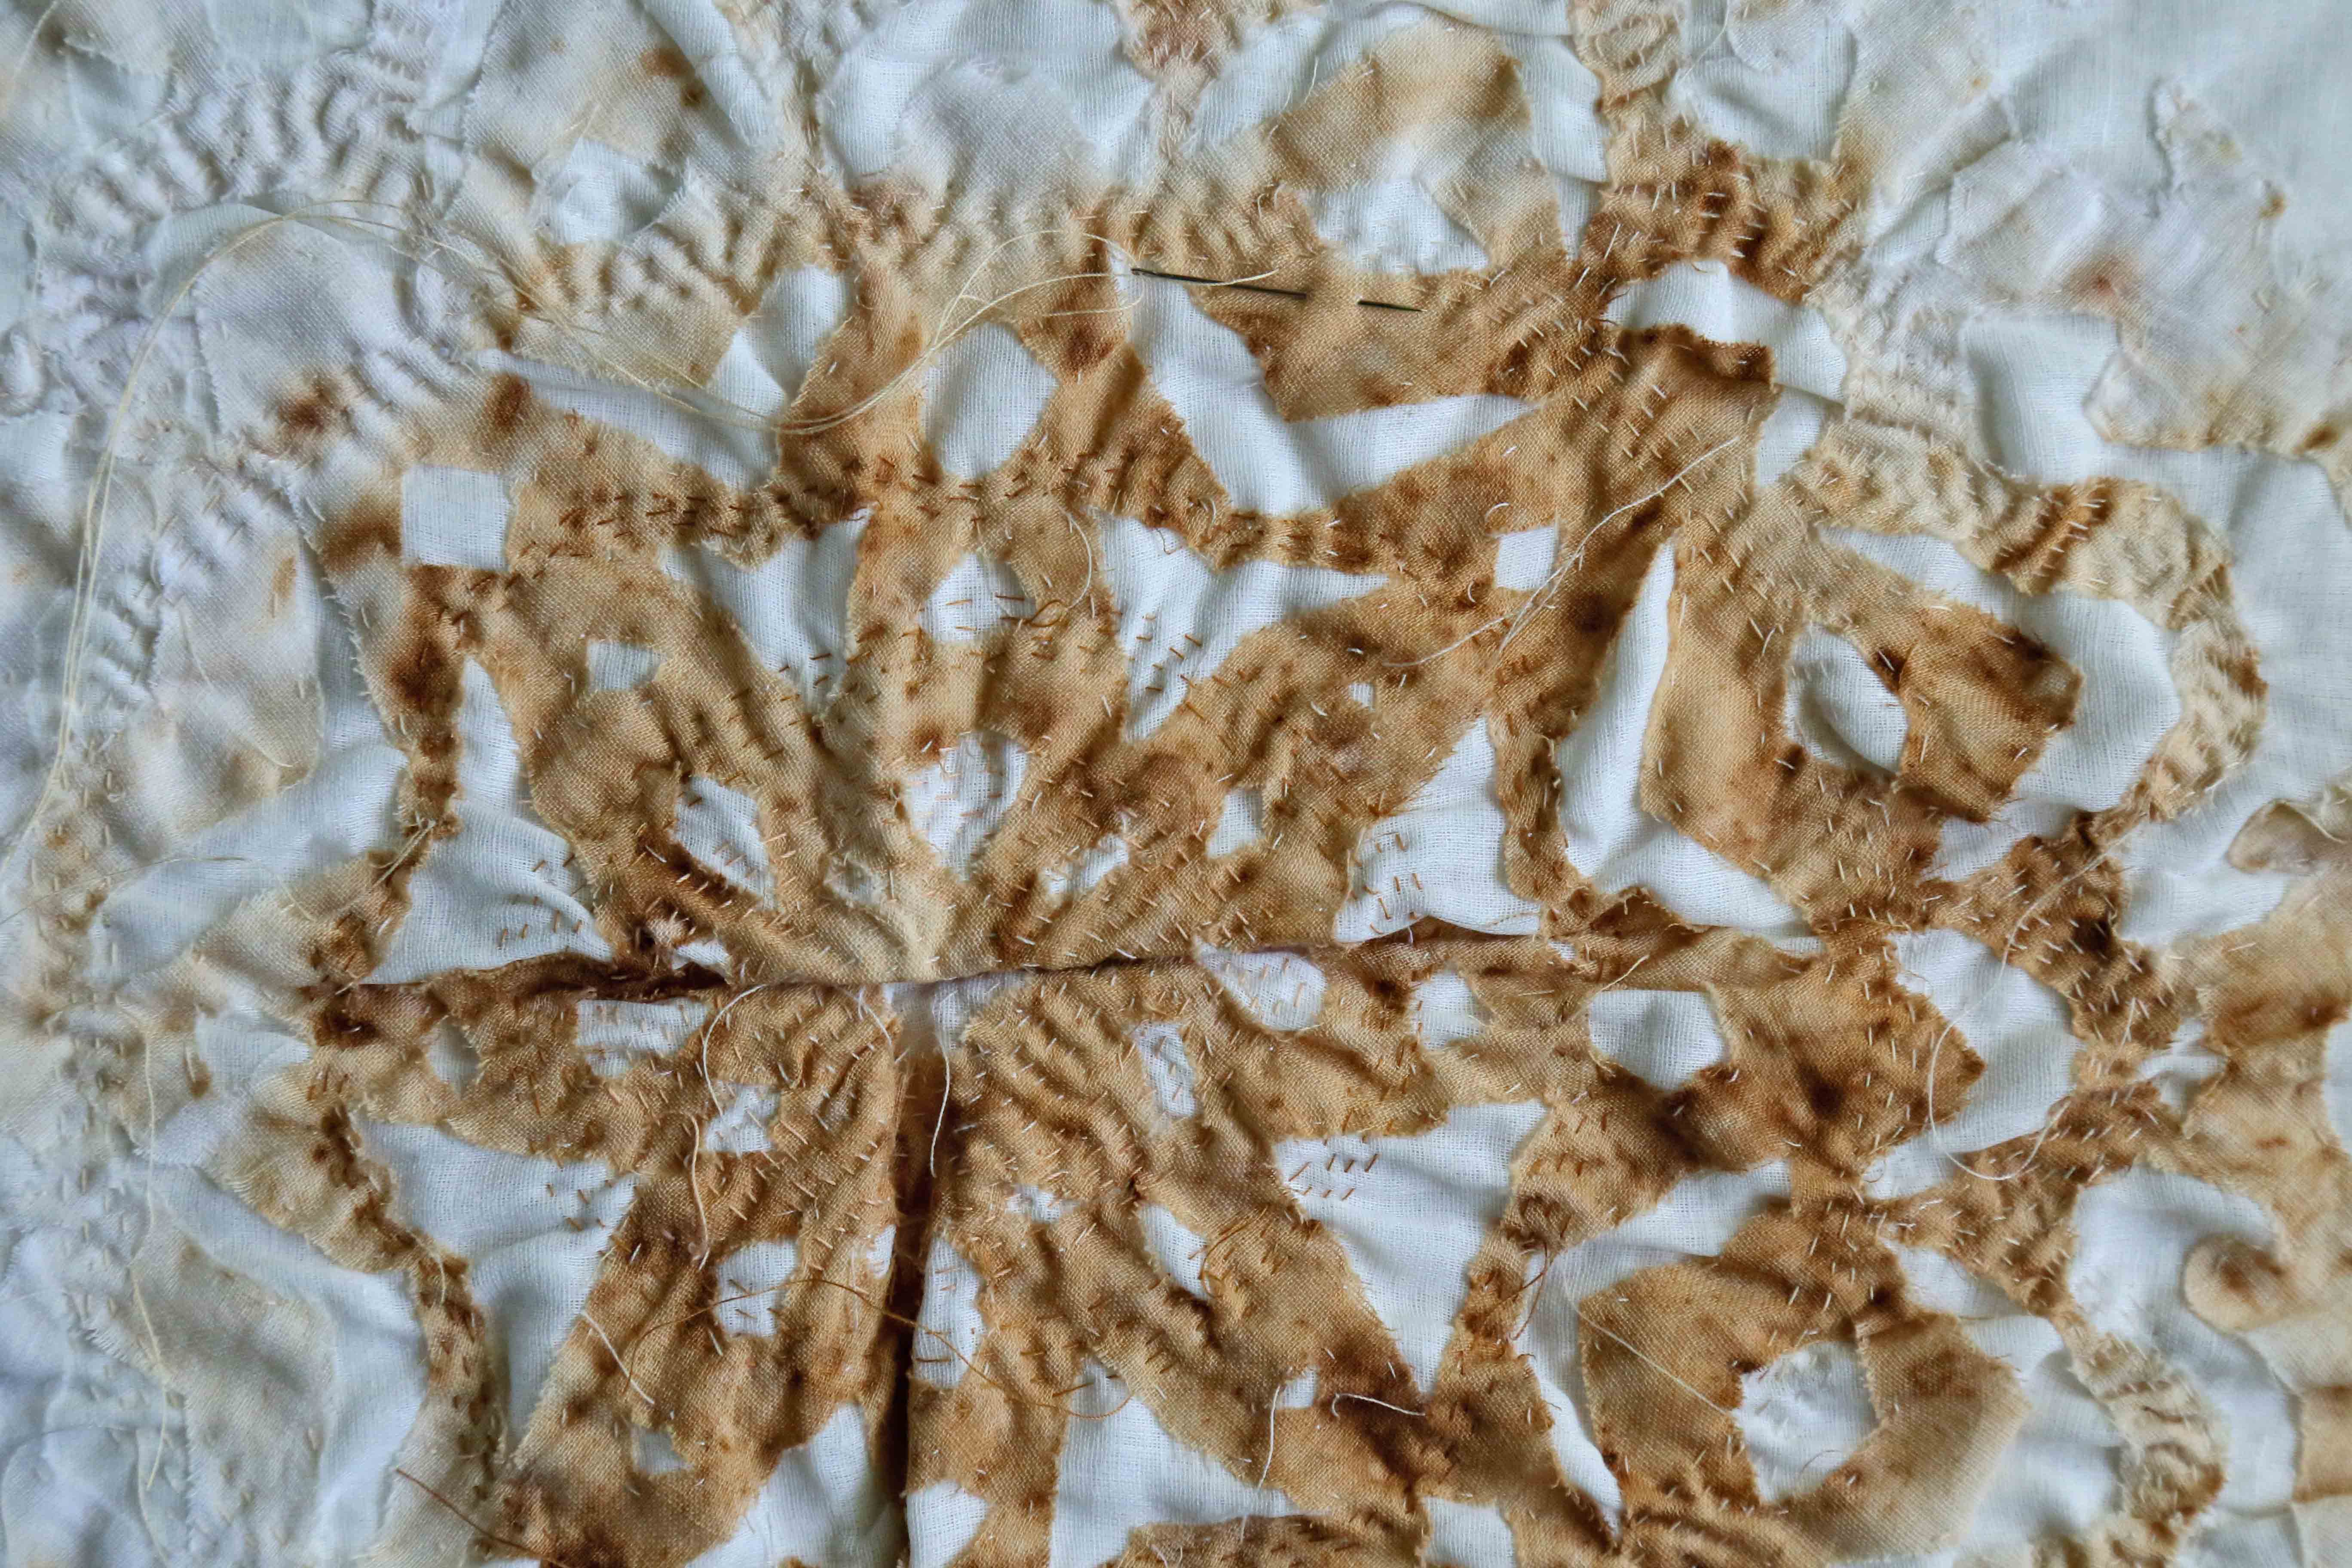 Patterns of Transformation 2015, [boxed], Materials: cotton fabrics, cotton-polyester thread Technique: hand and machine embroidery, cutting, layering, staining with tea-leaves, burning